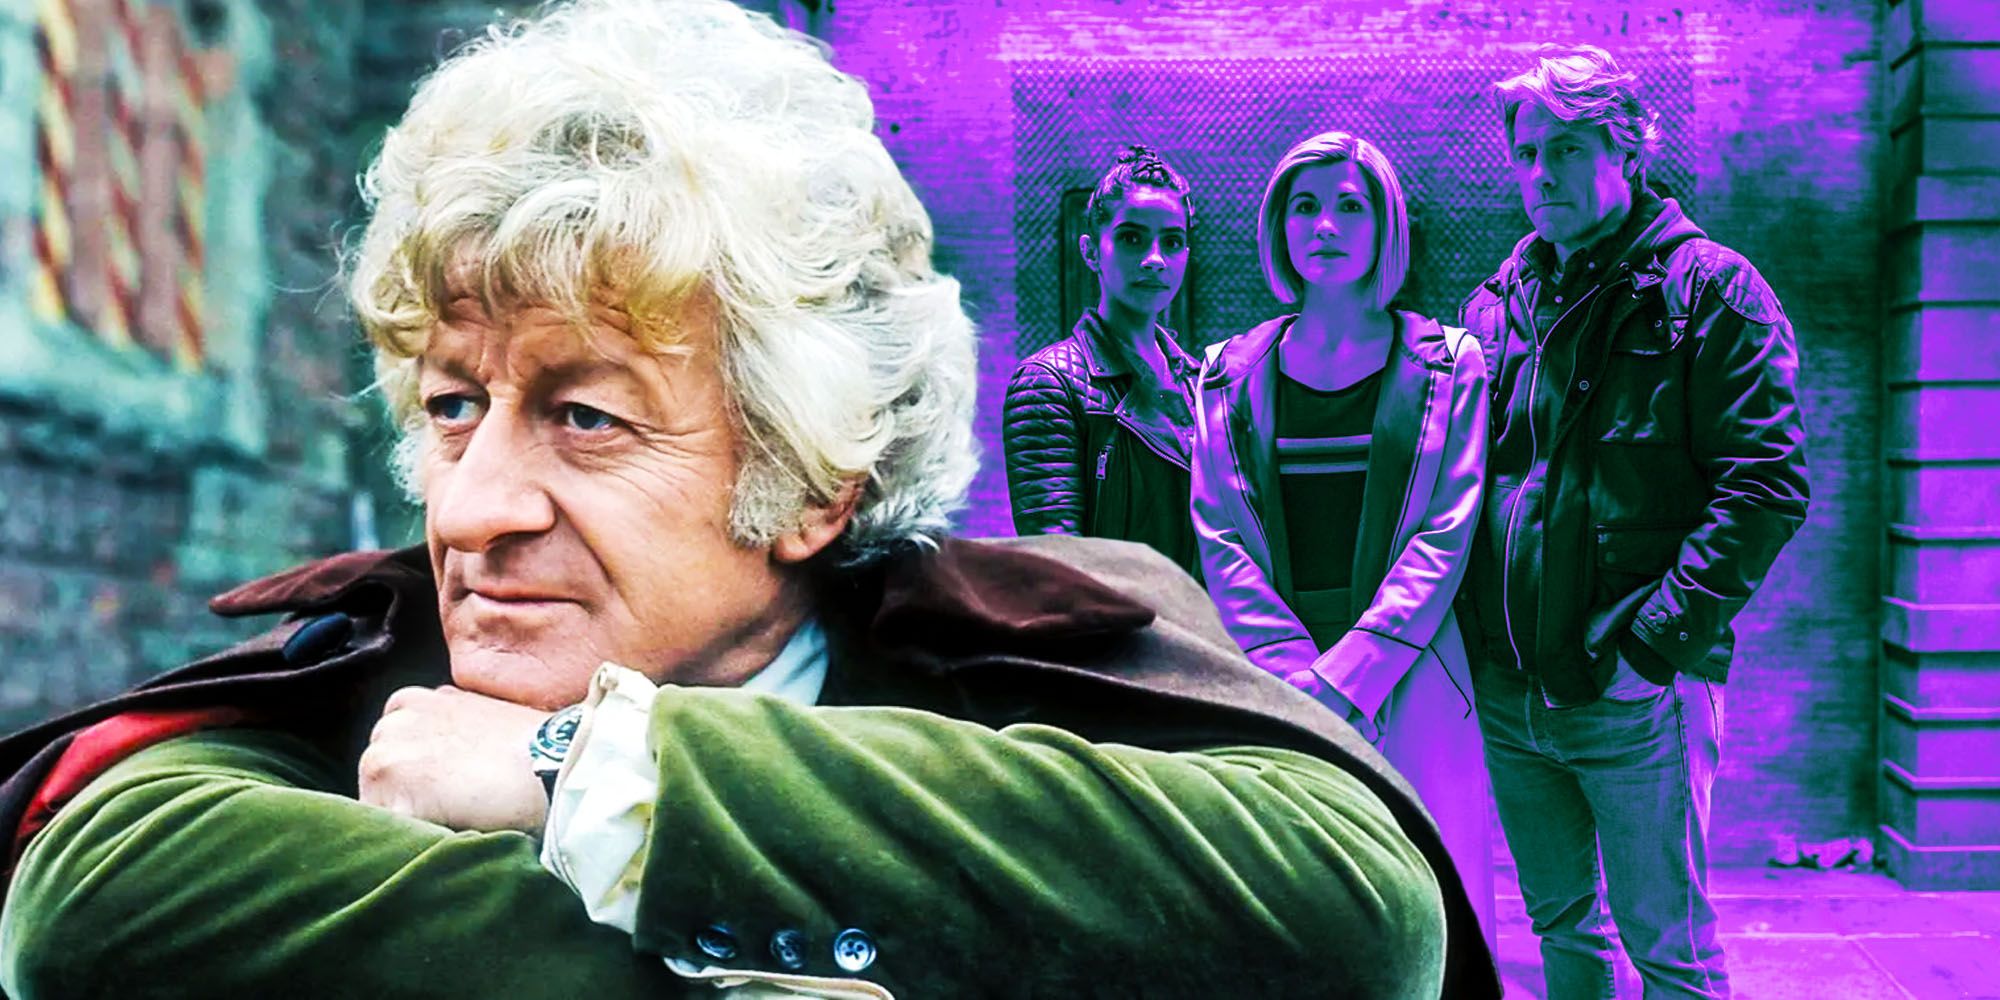 Doctor who season 13 returning to classic roots Pertwee era